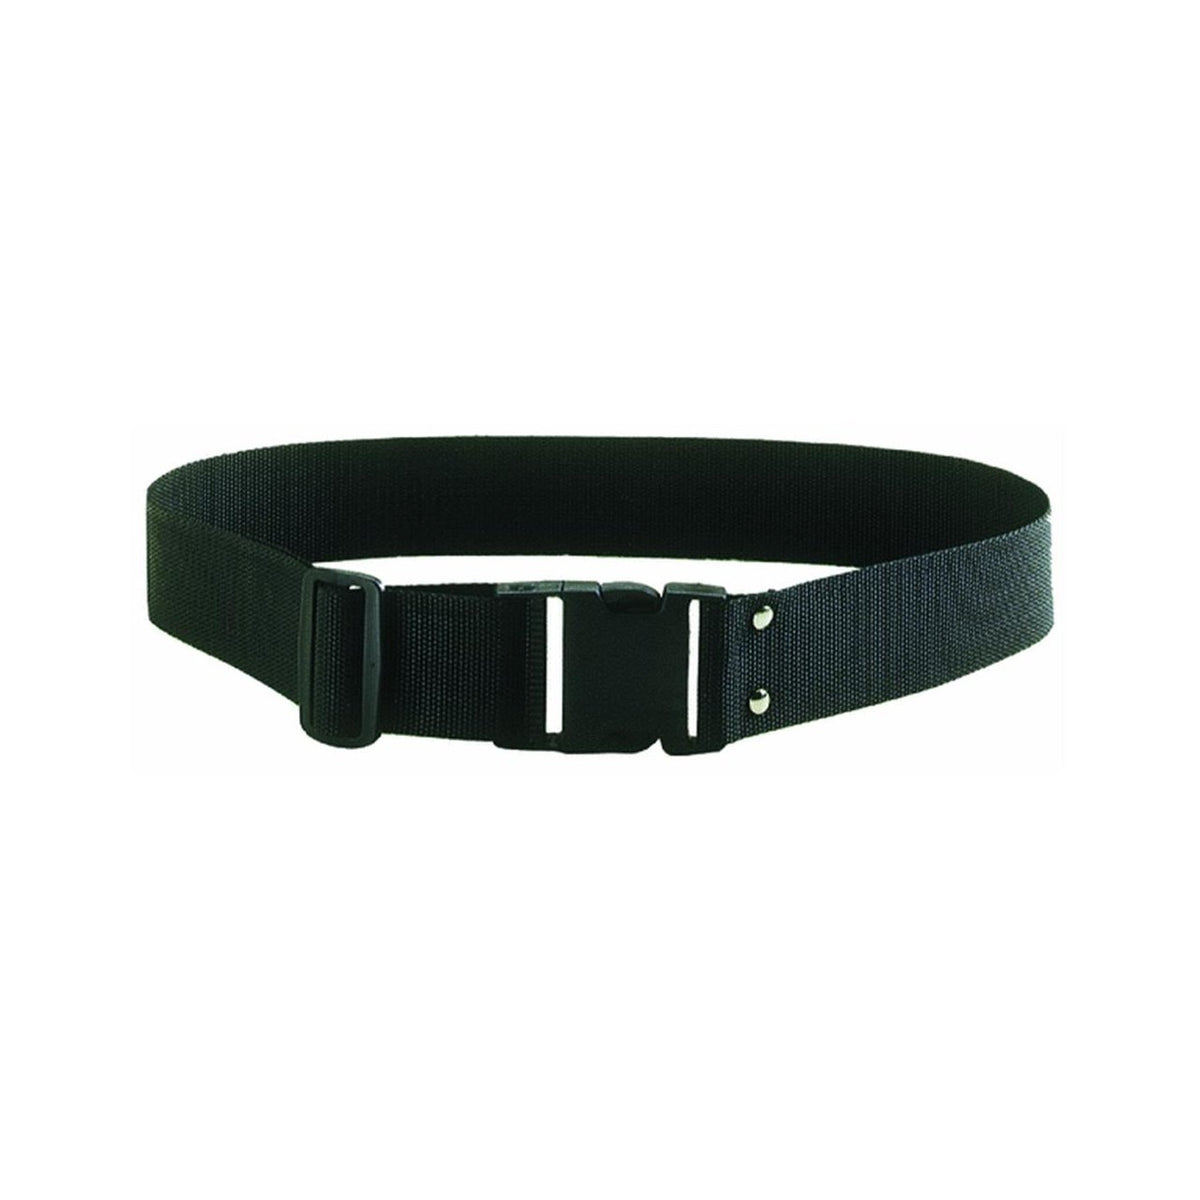 CLC 3505 ToolWorks Web Work Belt, 2" W, Large